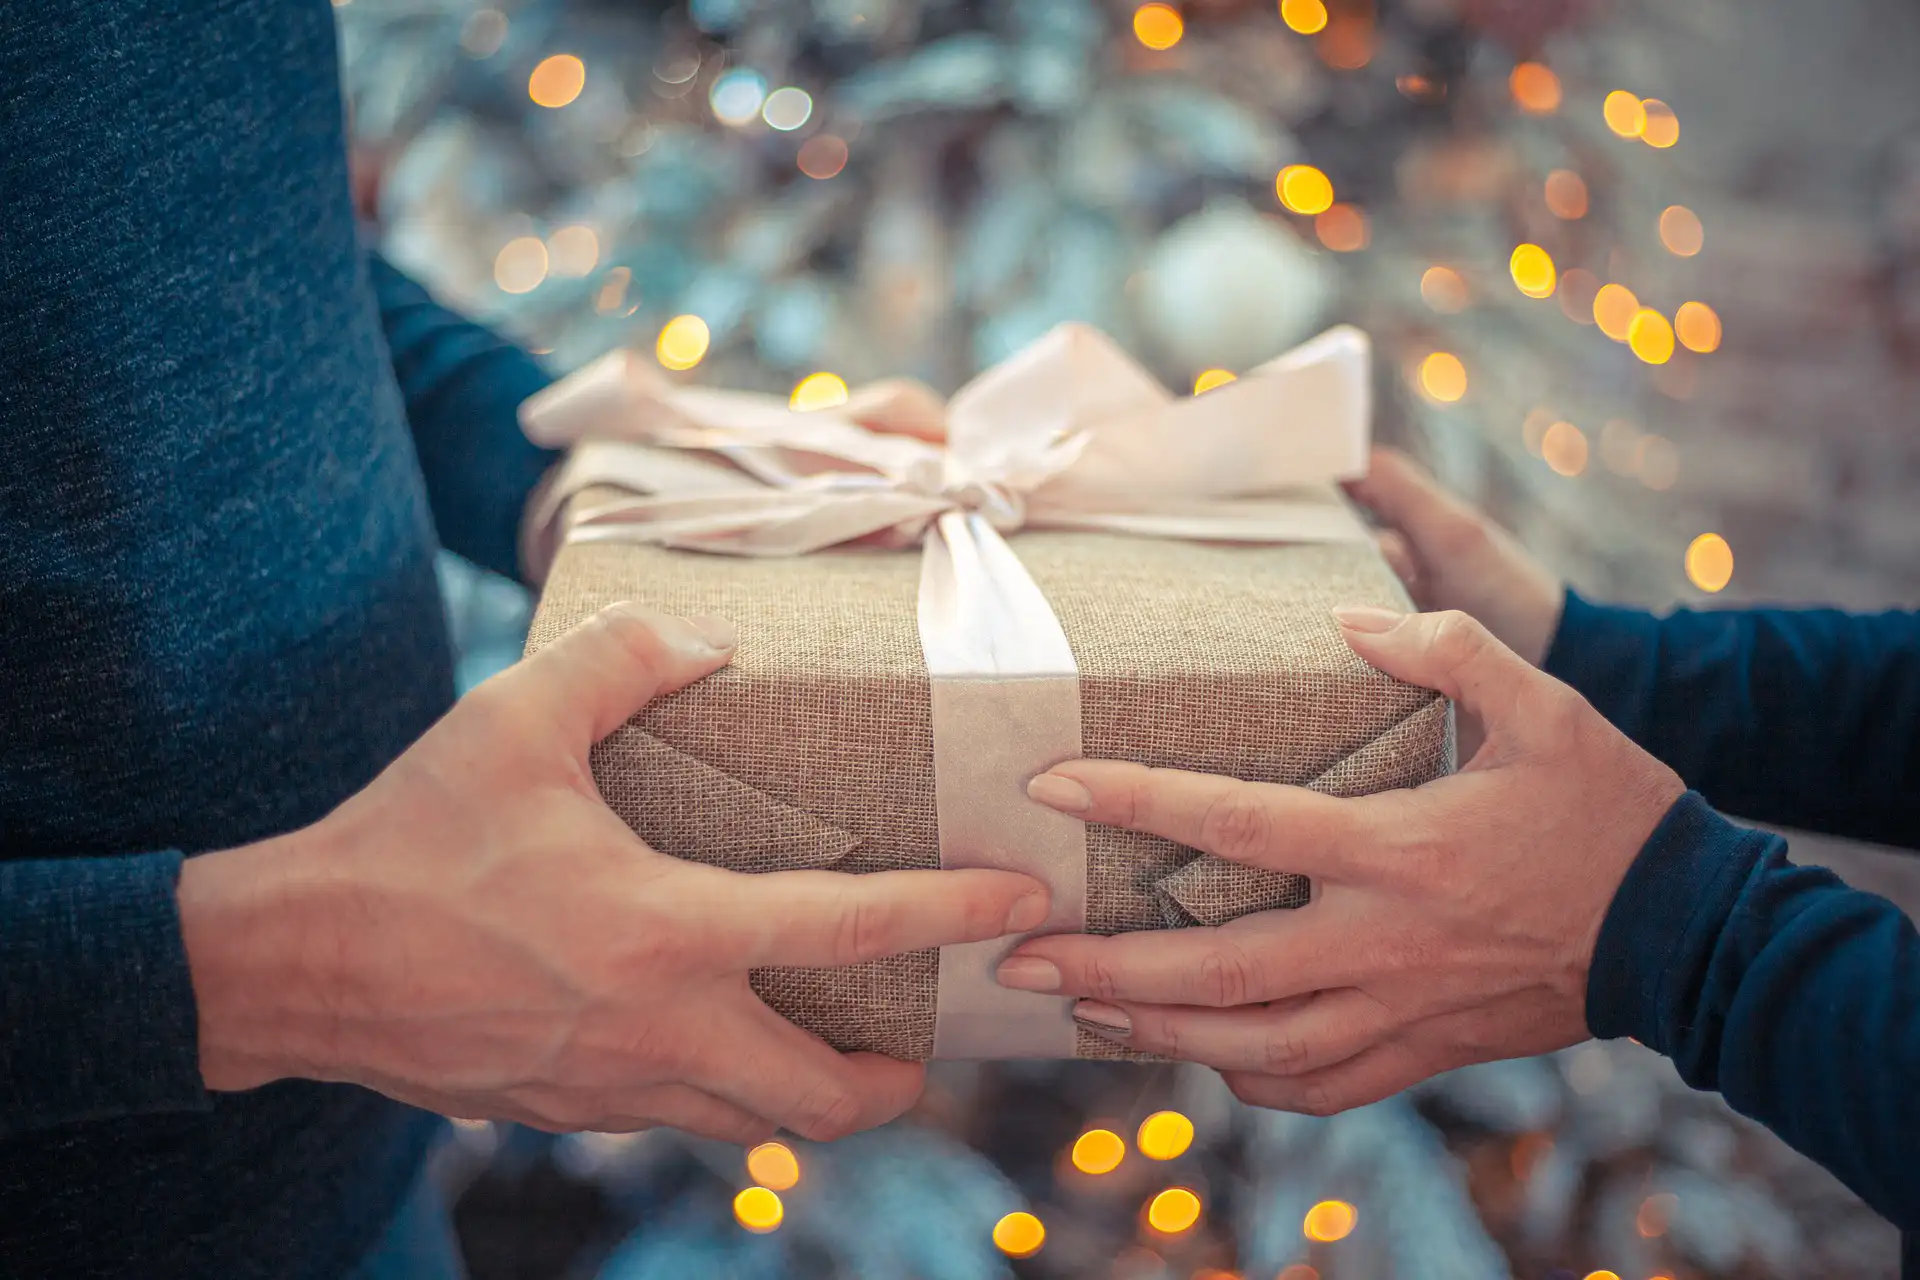 In the picture, the swapping of a gift between two people: we can see two hands holding a present with a white bow. In the background, some blurry lights.